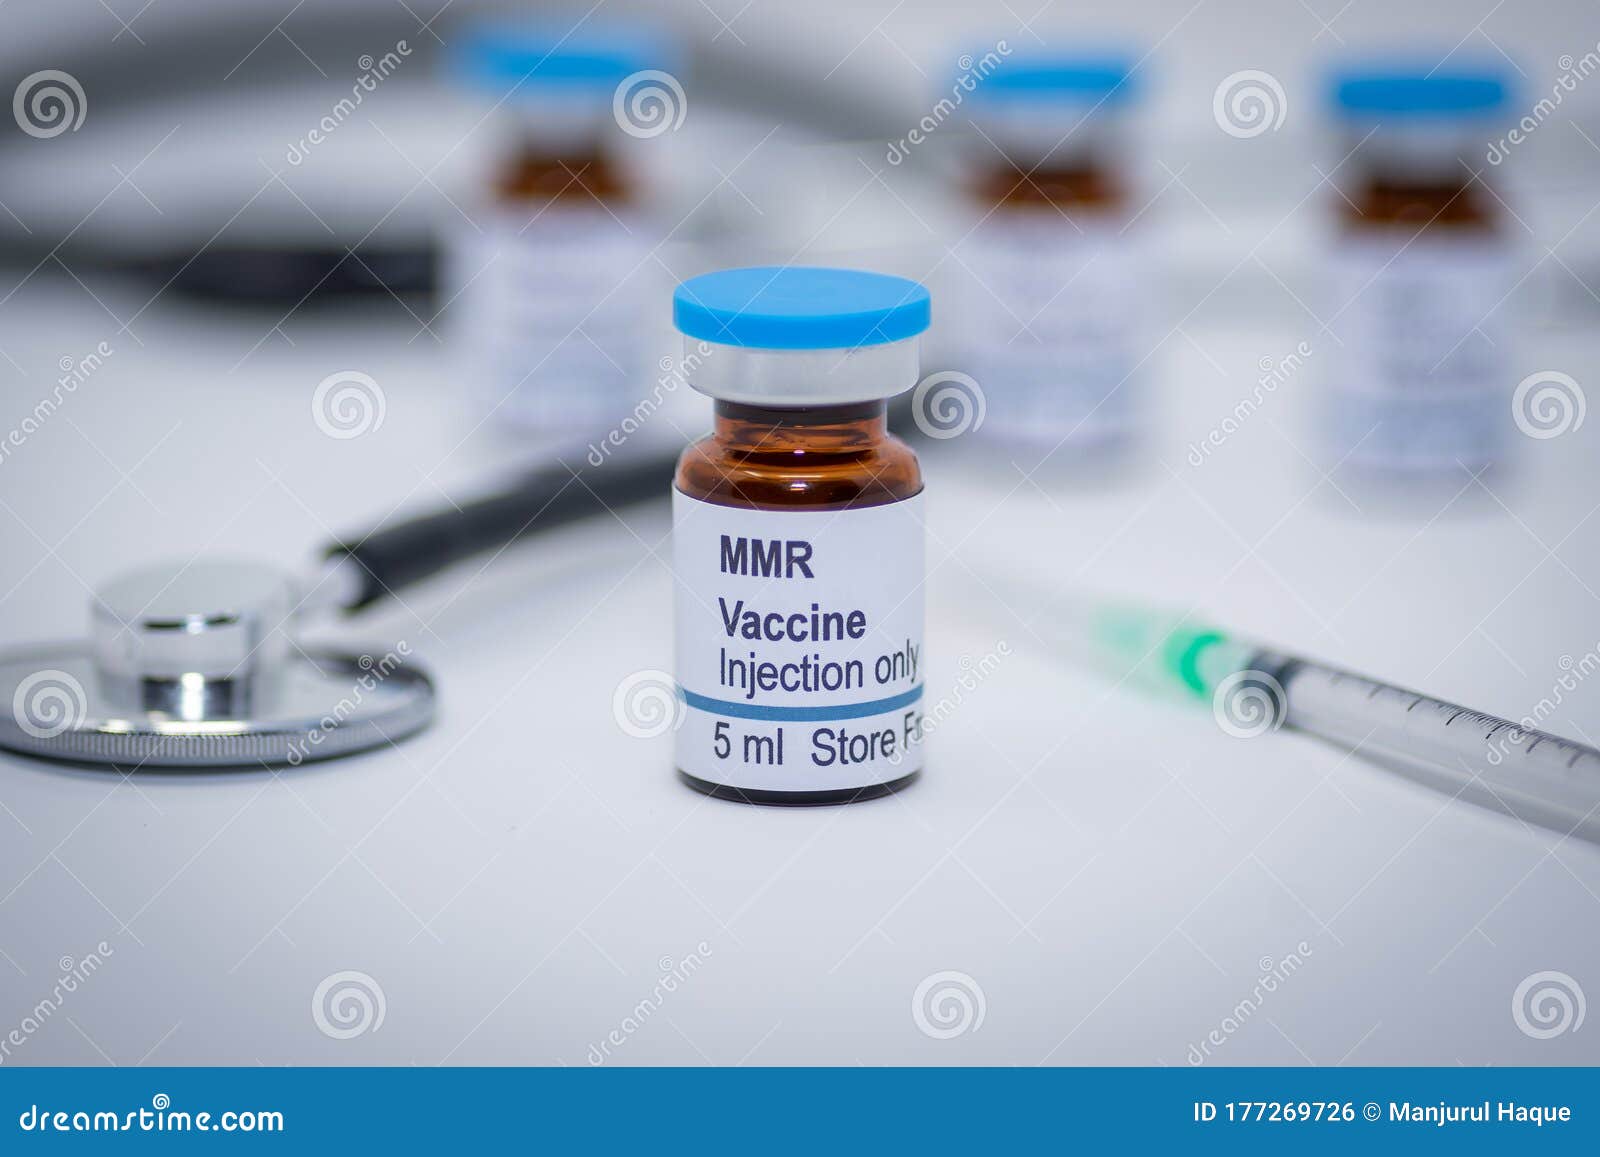 illustrative picture of measles mumps and rubella mmr vaccine vial with syringe and stethoscope